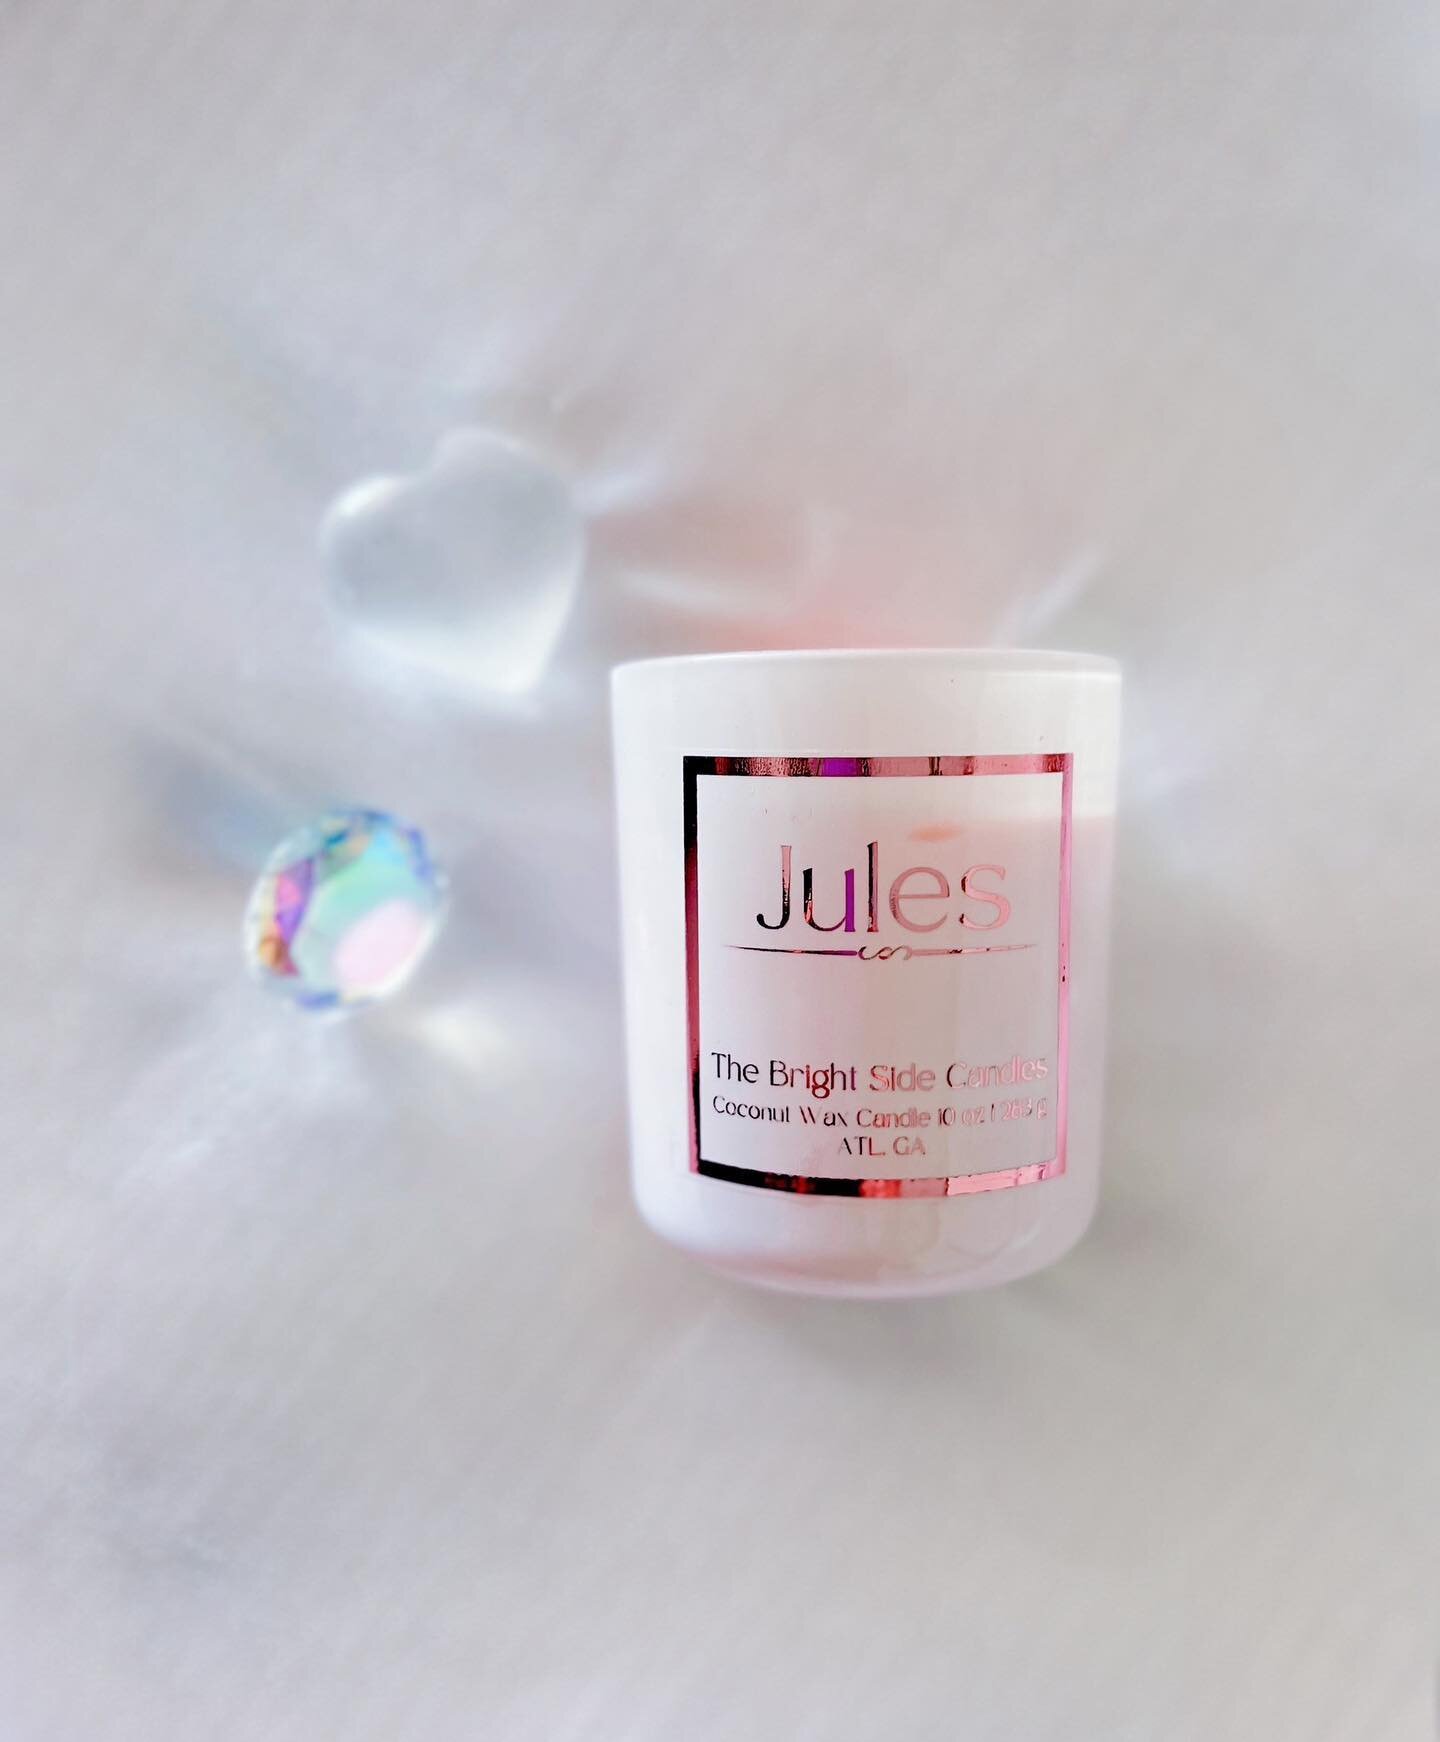 This Jules Ambrose (Twisted Hate by @authoranahuang) inspired candle is one of my go-to reorders @thebrightsidecandles (website restock on May 19th!)❤️&zwj;🔥 

Use my discount code: PPF21 for 10% off! 

Scent Notes: 
Crystalized ginger dominates a m